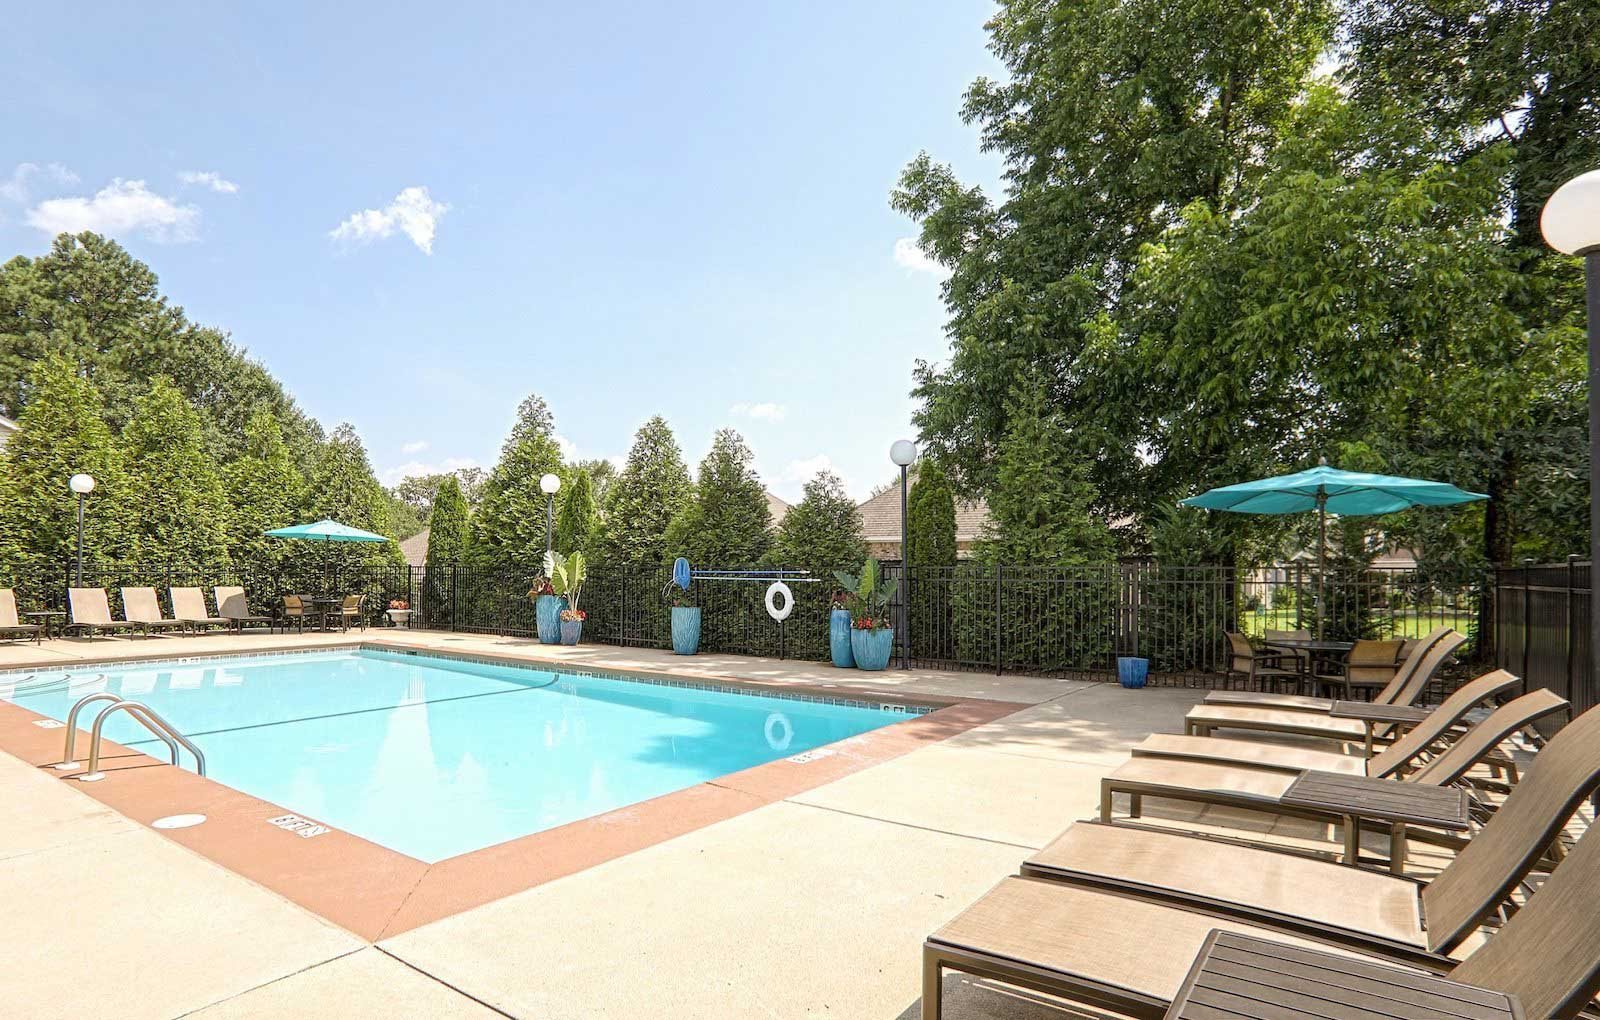 Swimming pool with sundeck and lounge furniture at The Point at Fairview Apartments, Prattville, Alabama